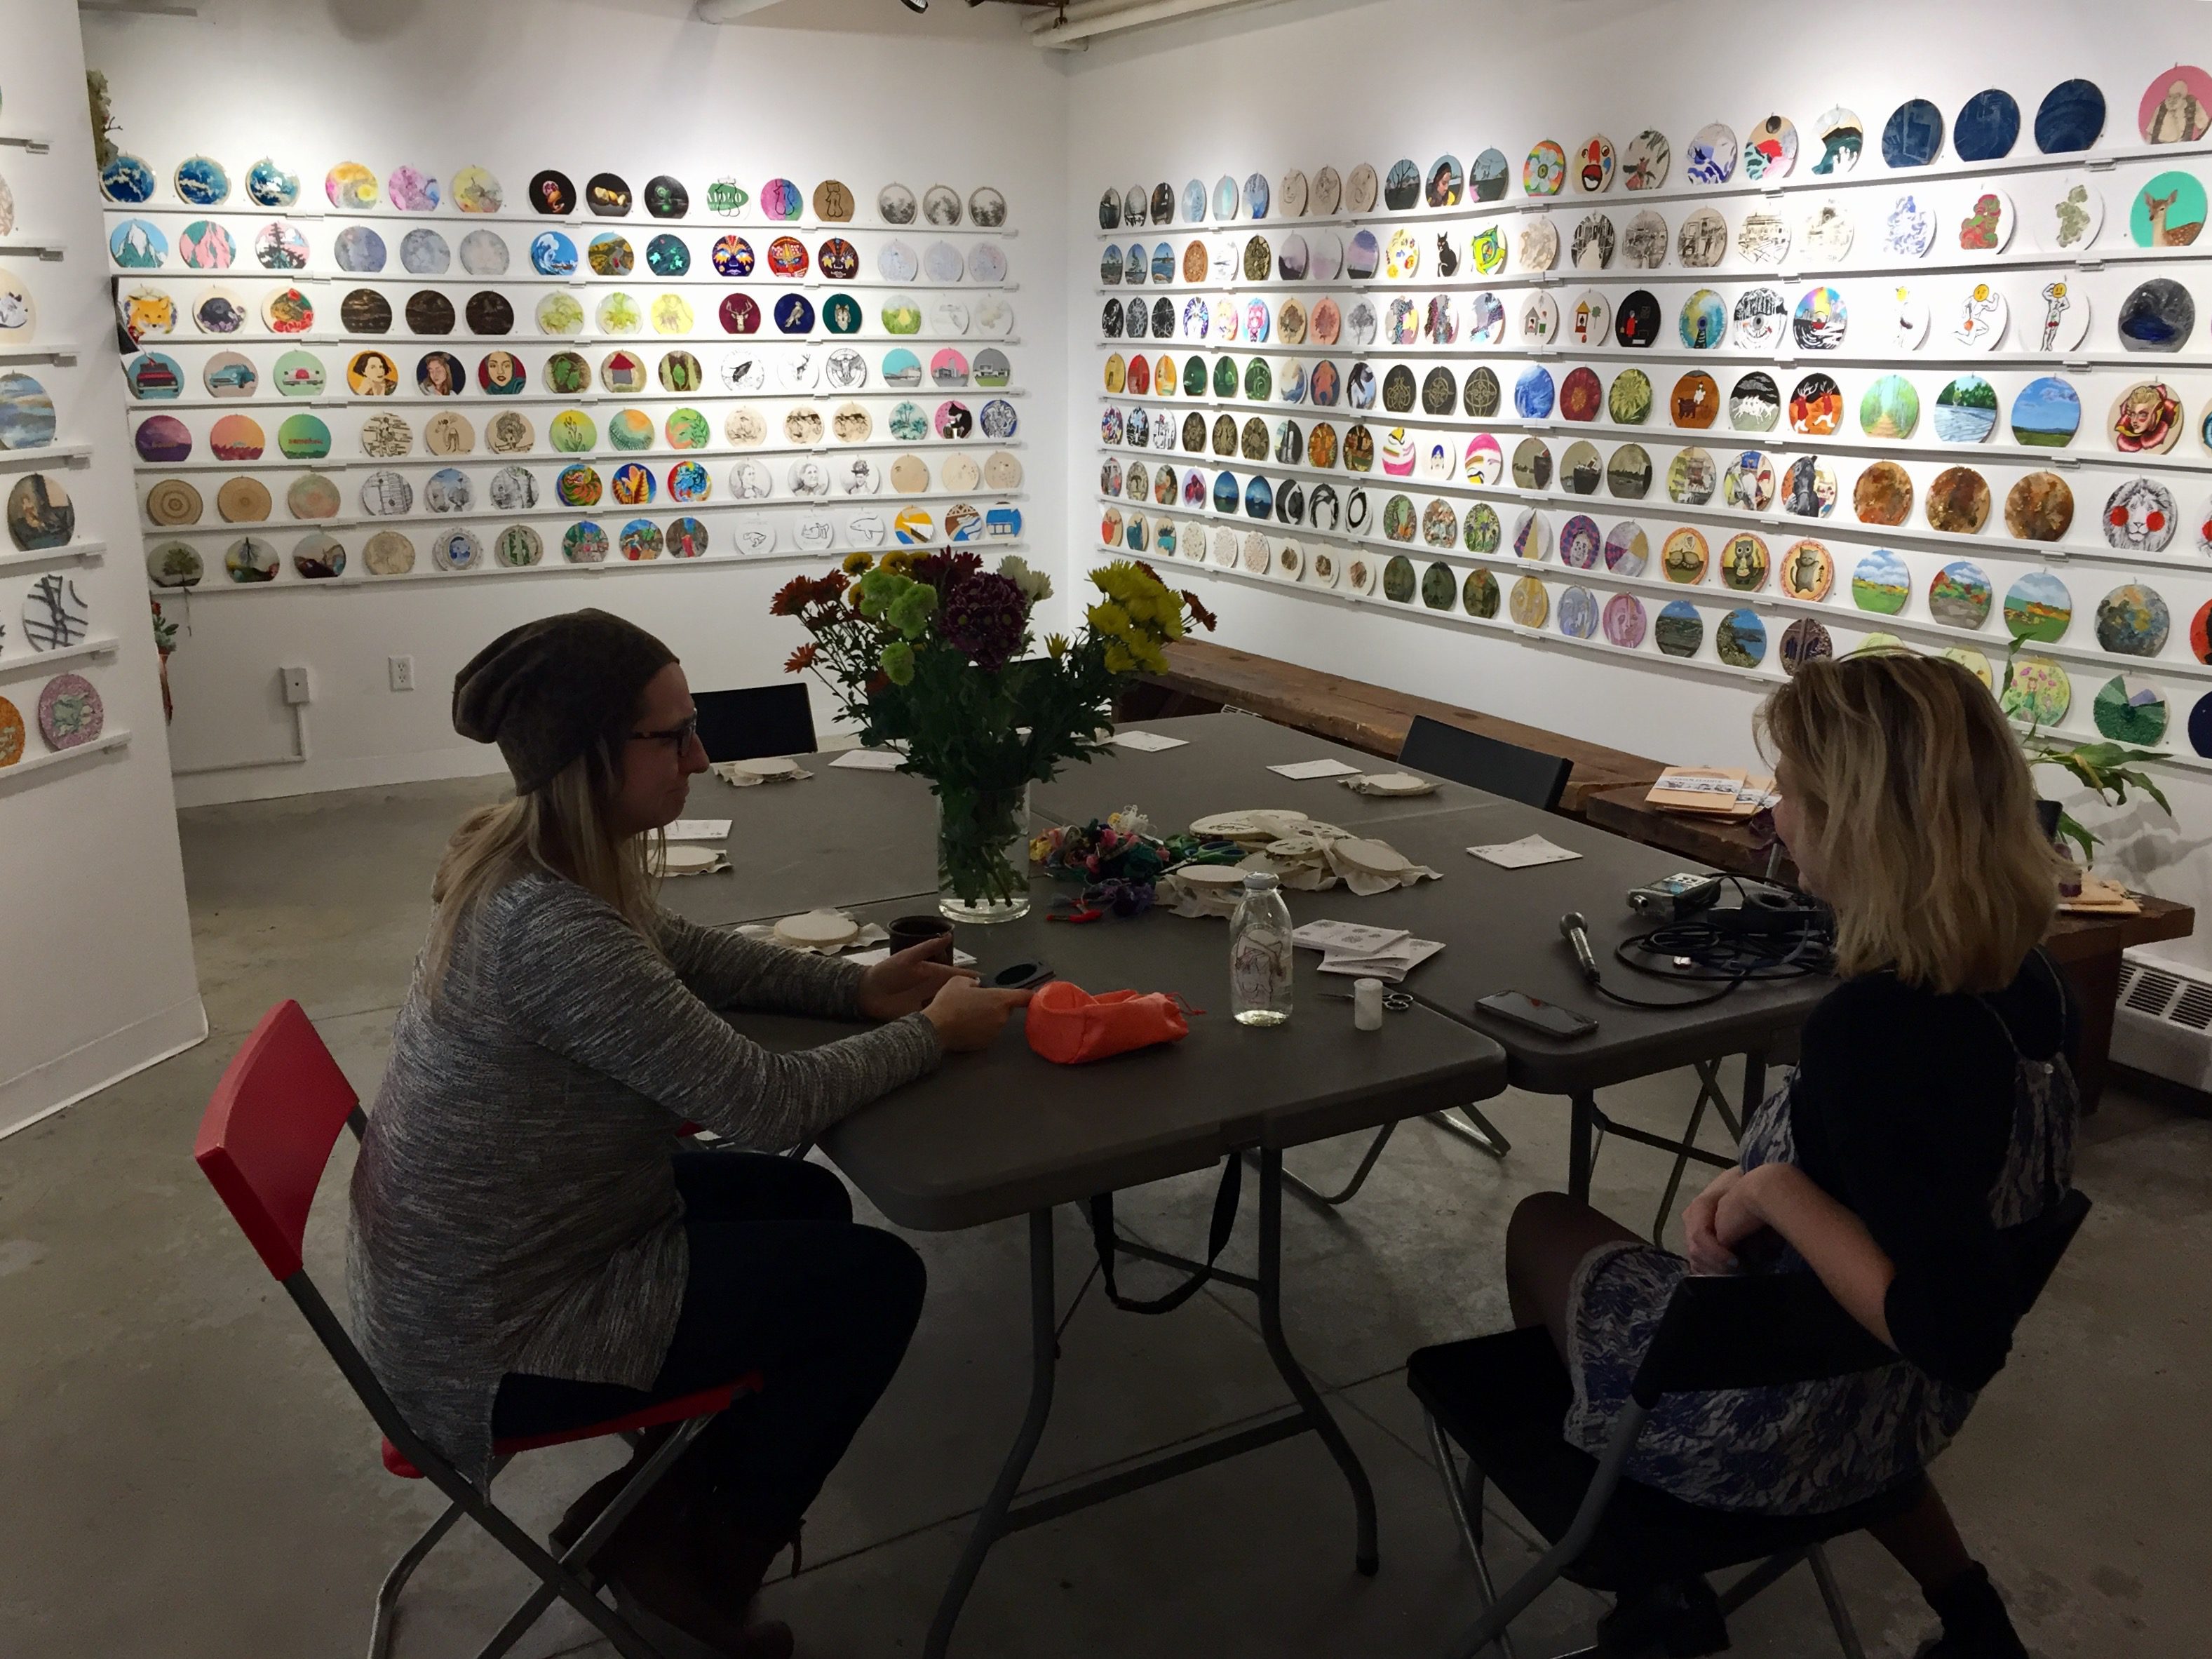 Two women in workshop stitching surrounded by art